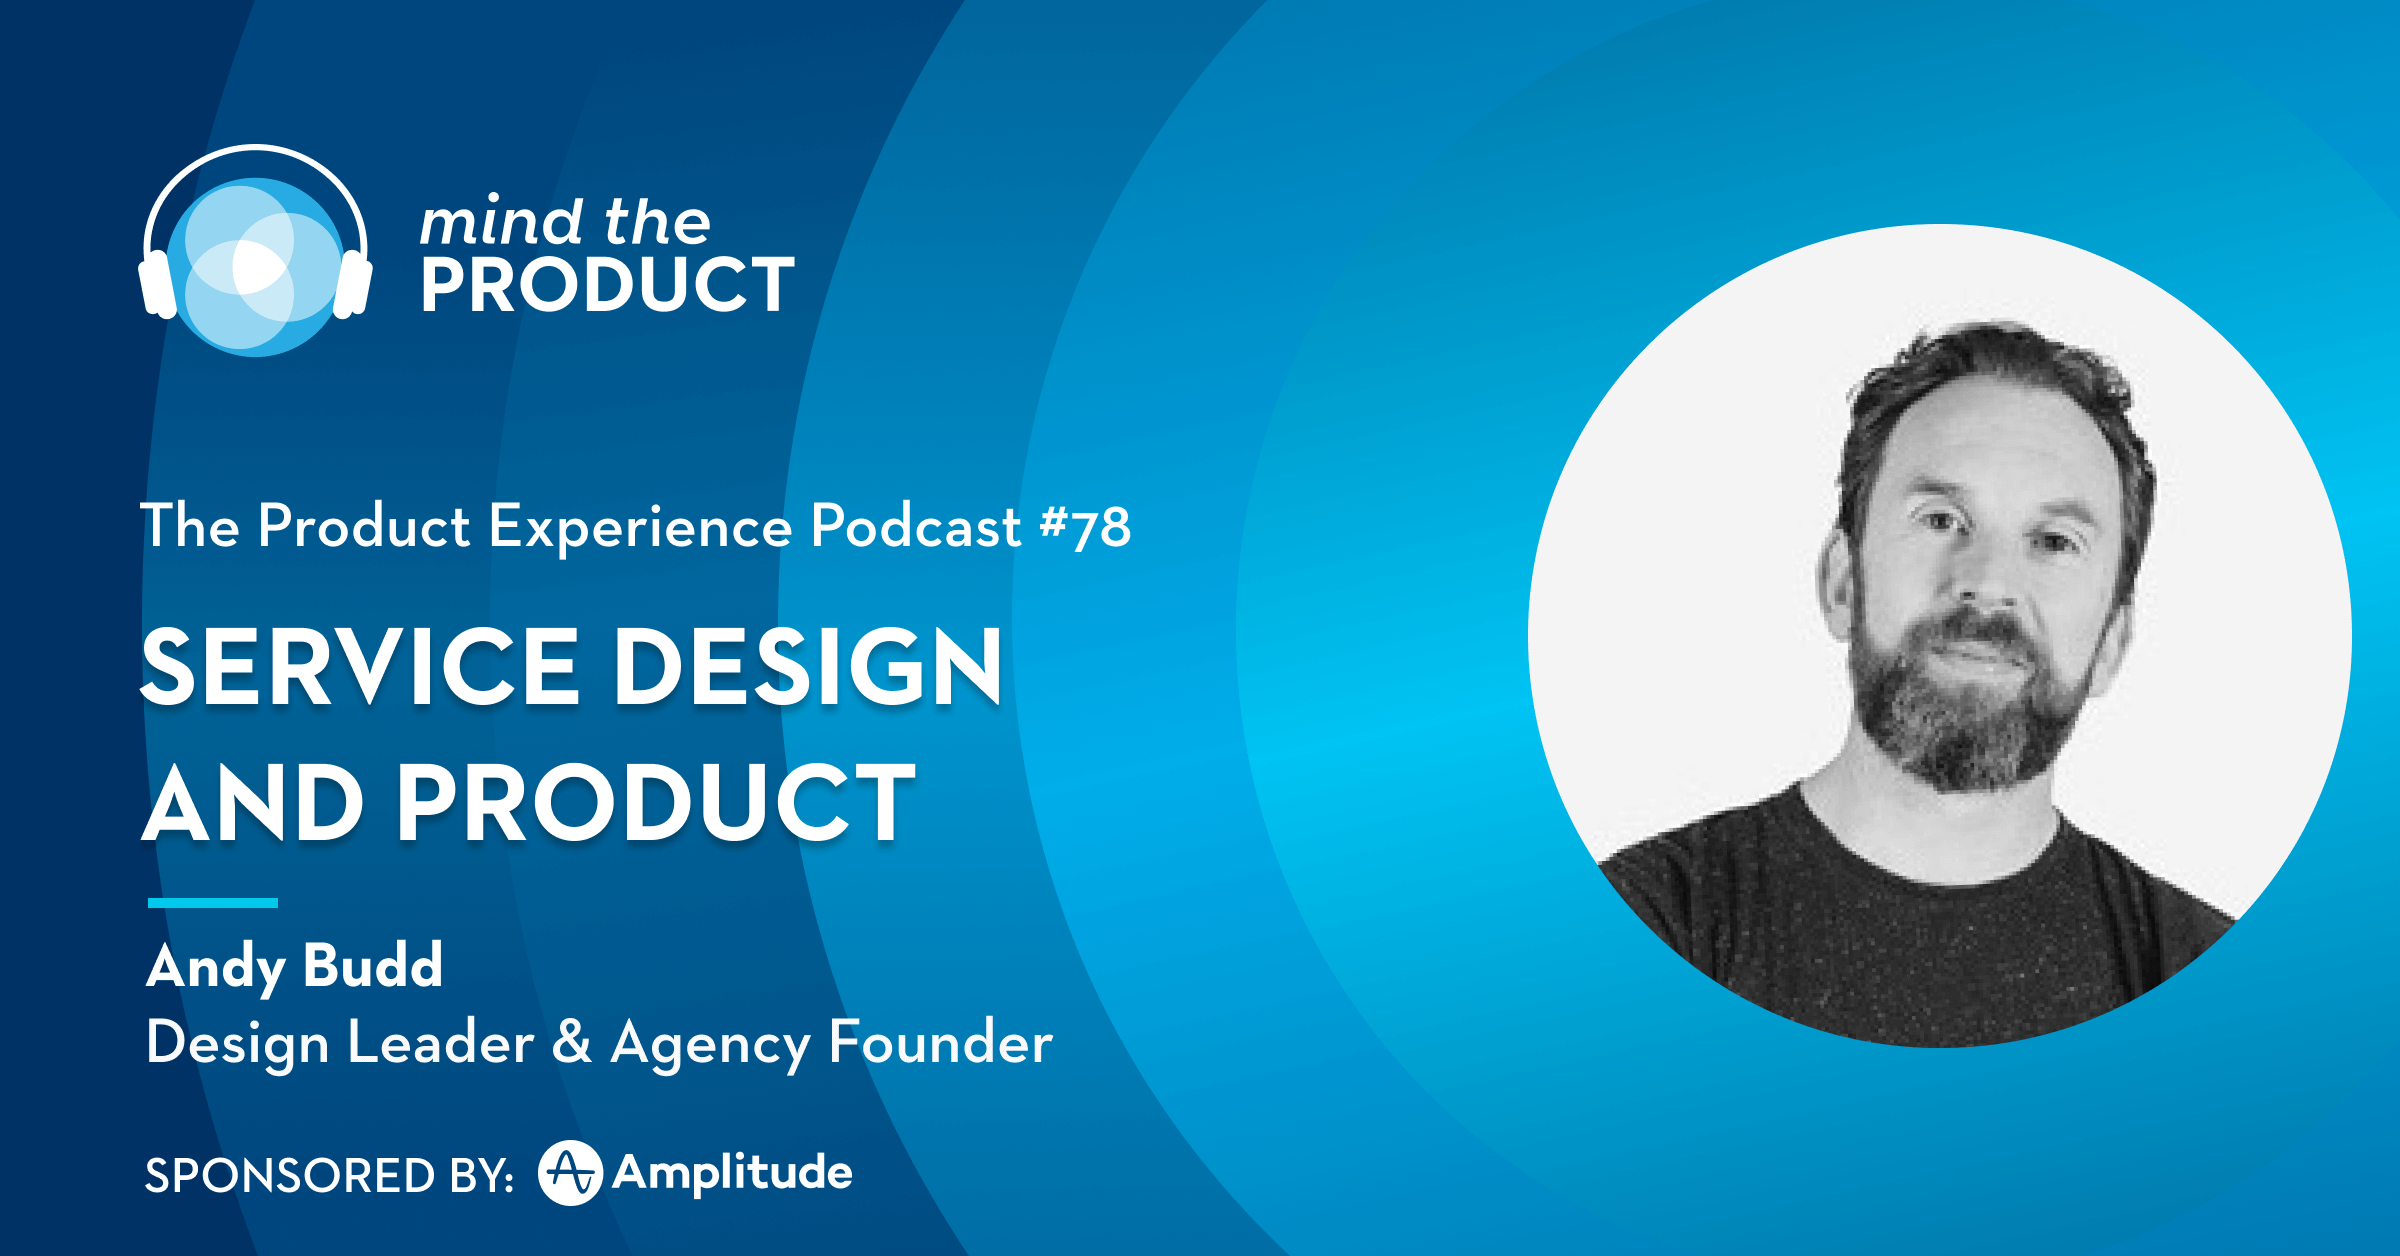 Andy Budd on The Product Experience